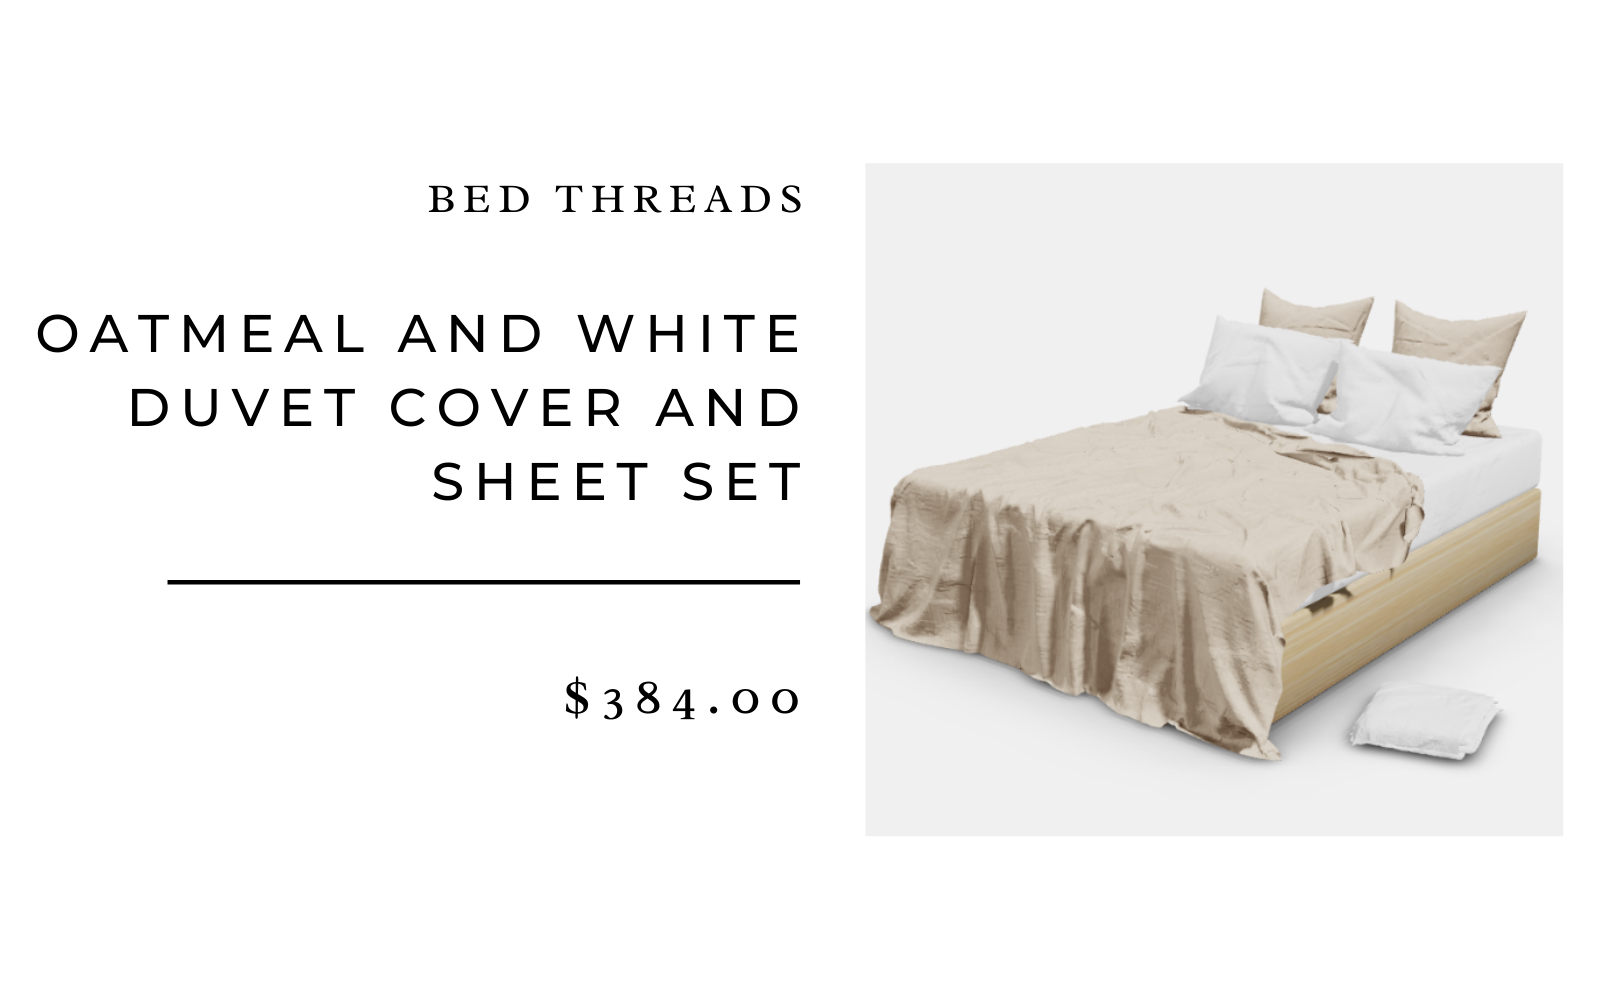 Bed Threads Oatmeal and White Duvet Cover and Sheet Set